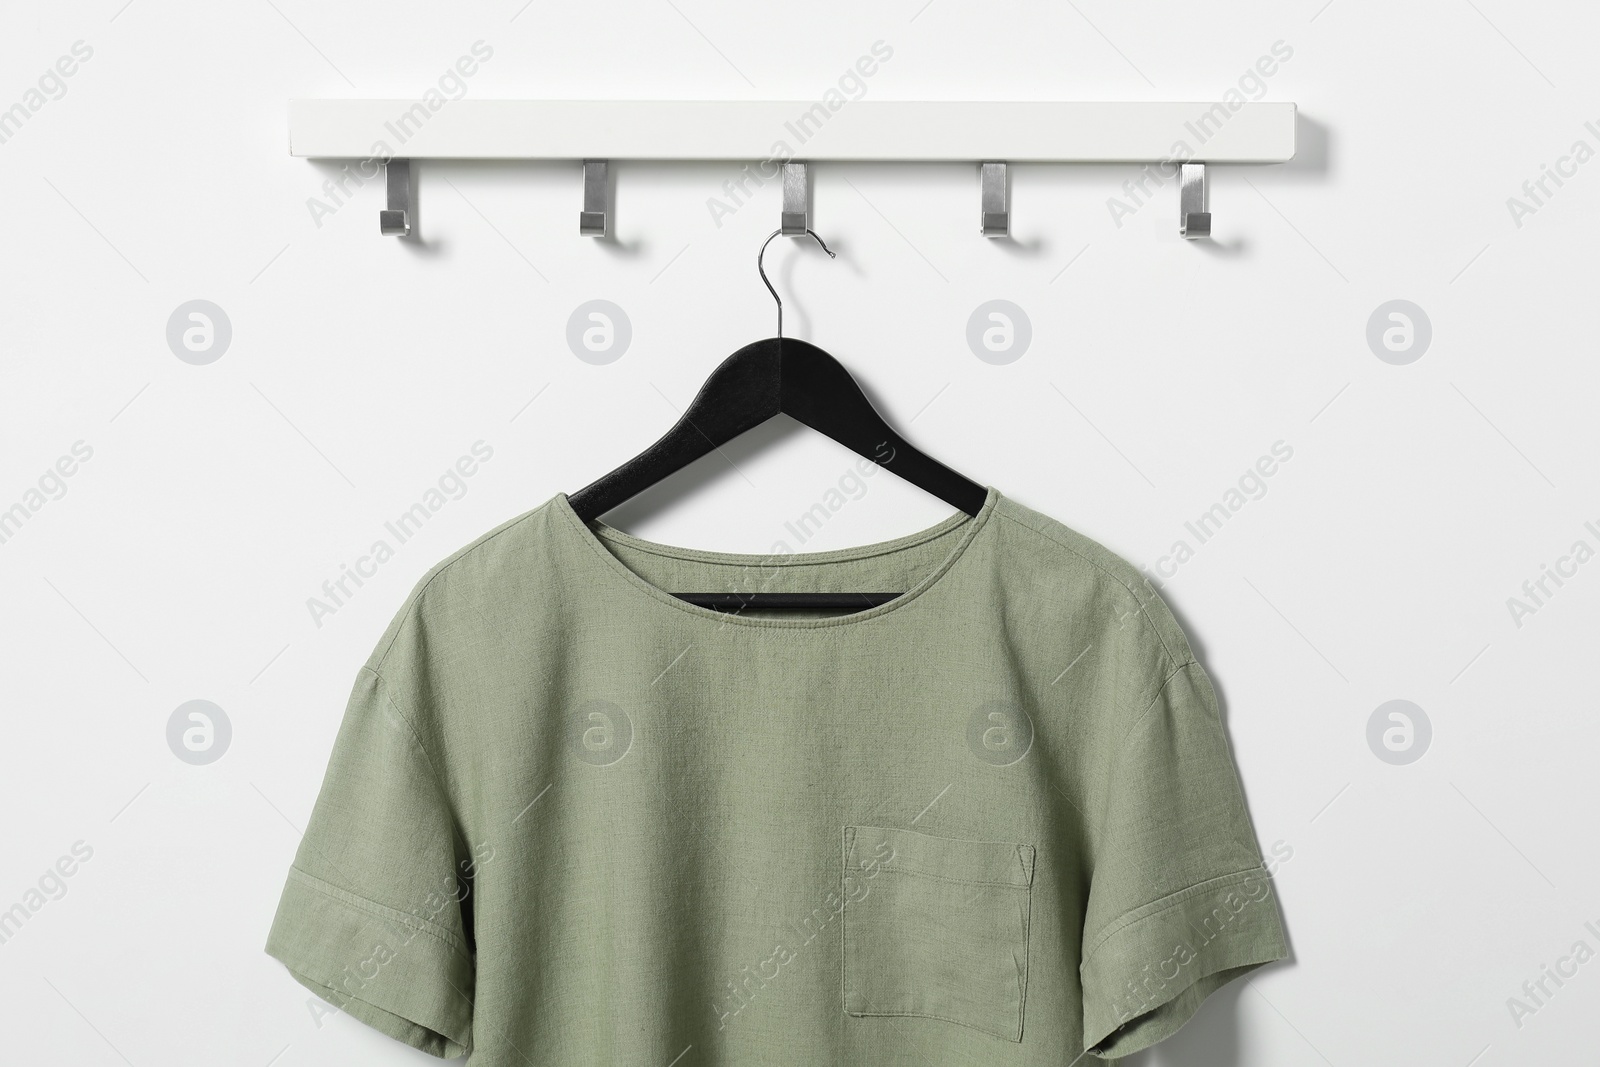 Photo of Hanger with olive t-shirt on white wall